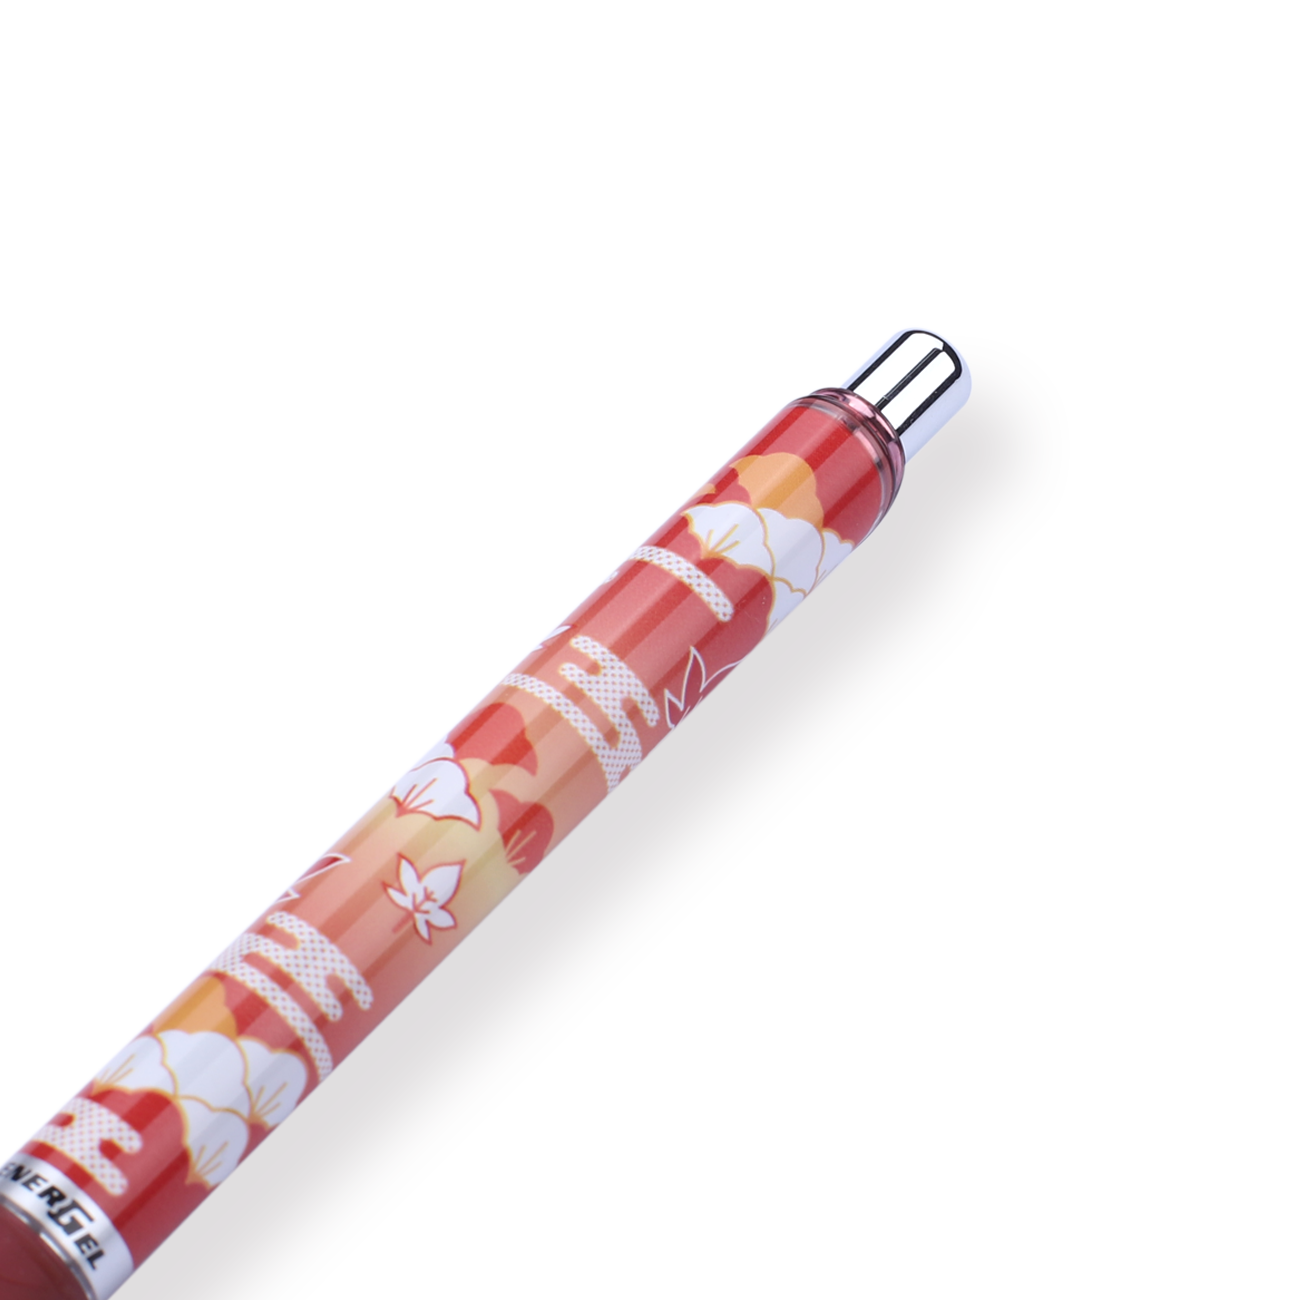 Pentel EnerGel Fall-themed Limited Edition Gel Pen - 0.5 mm - Red Grip - Stationery Pal